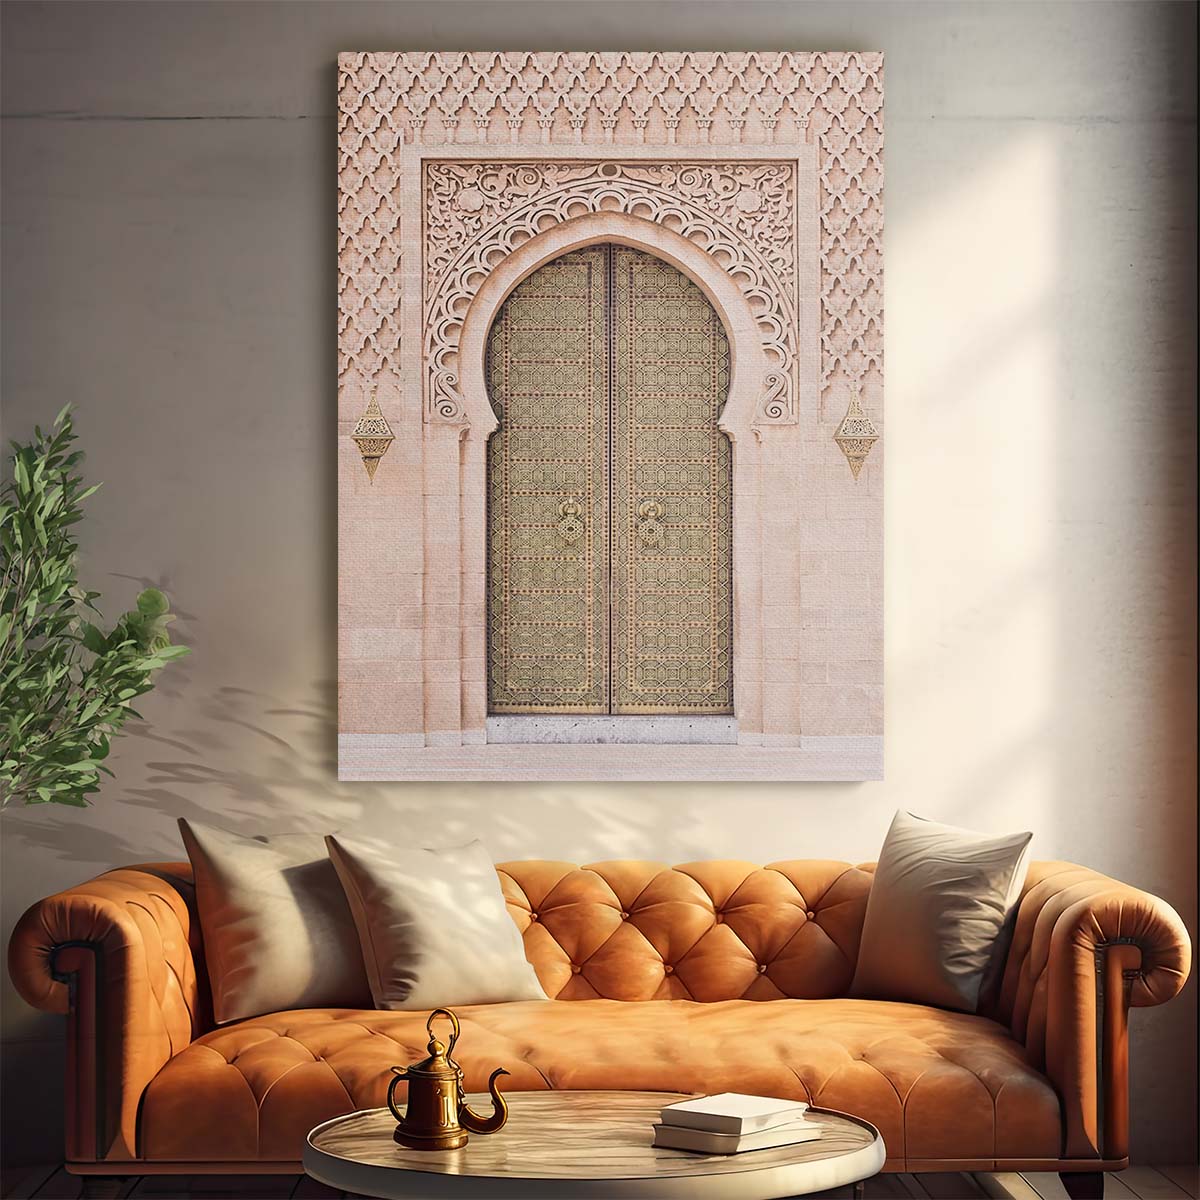 Moroccan Door Boho Architectural Photography - Kathrin Pienaar by Luxuriance Designs, made in USA